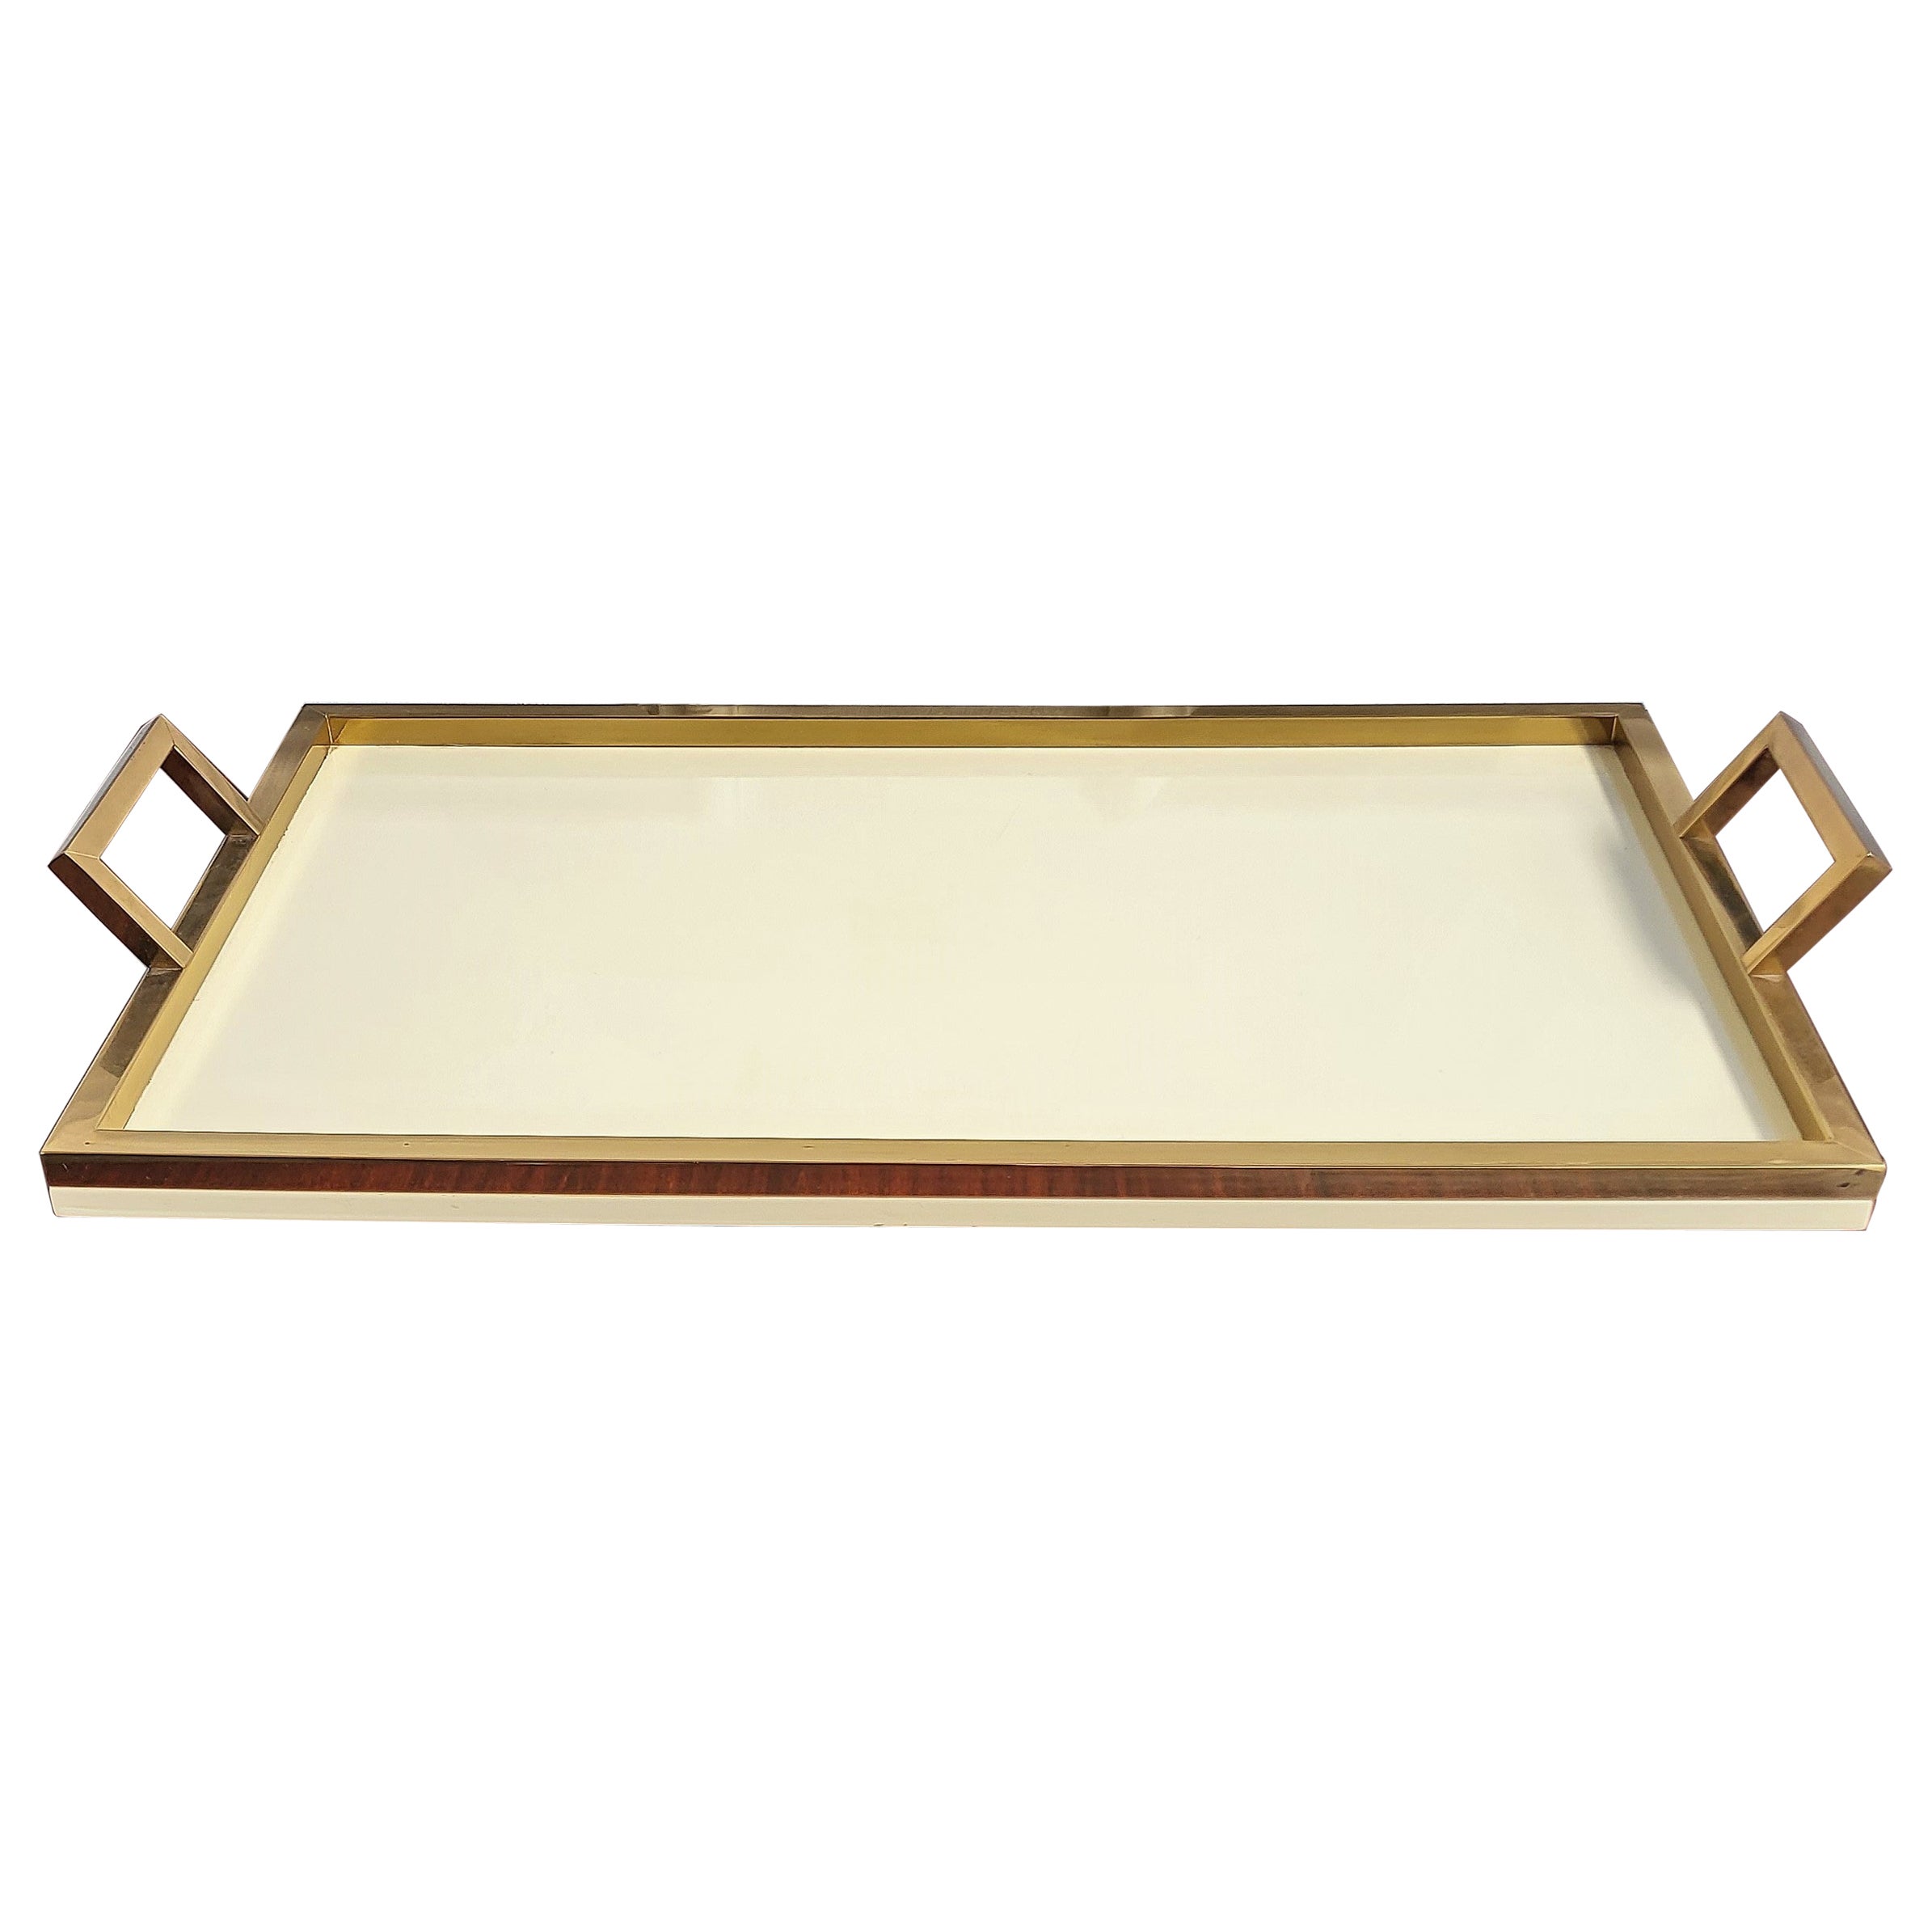 Tommaso Barbi Rectangular Brass & White Lacquered Centerpiece Tray, Italy, 1970s For Sale